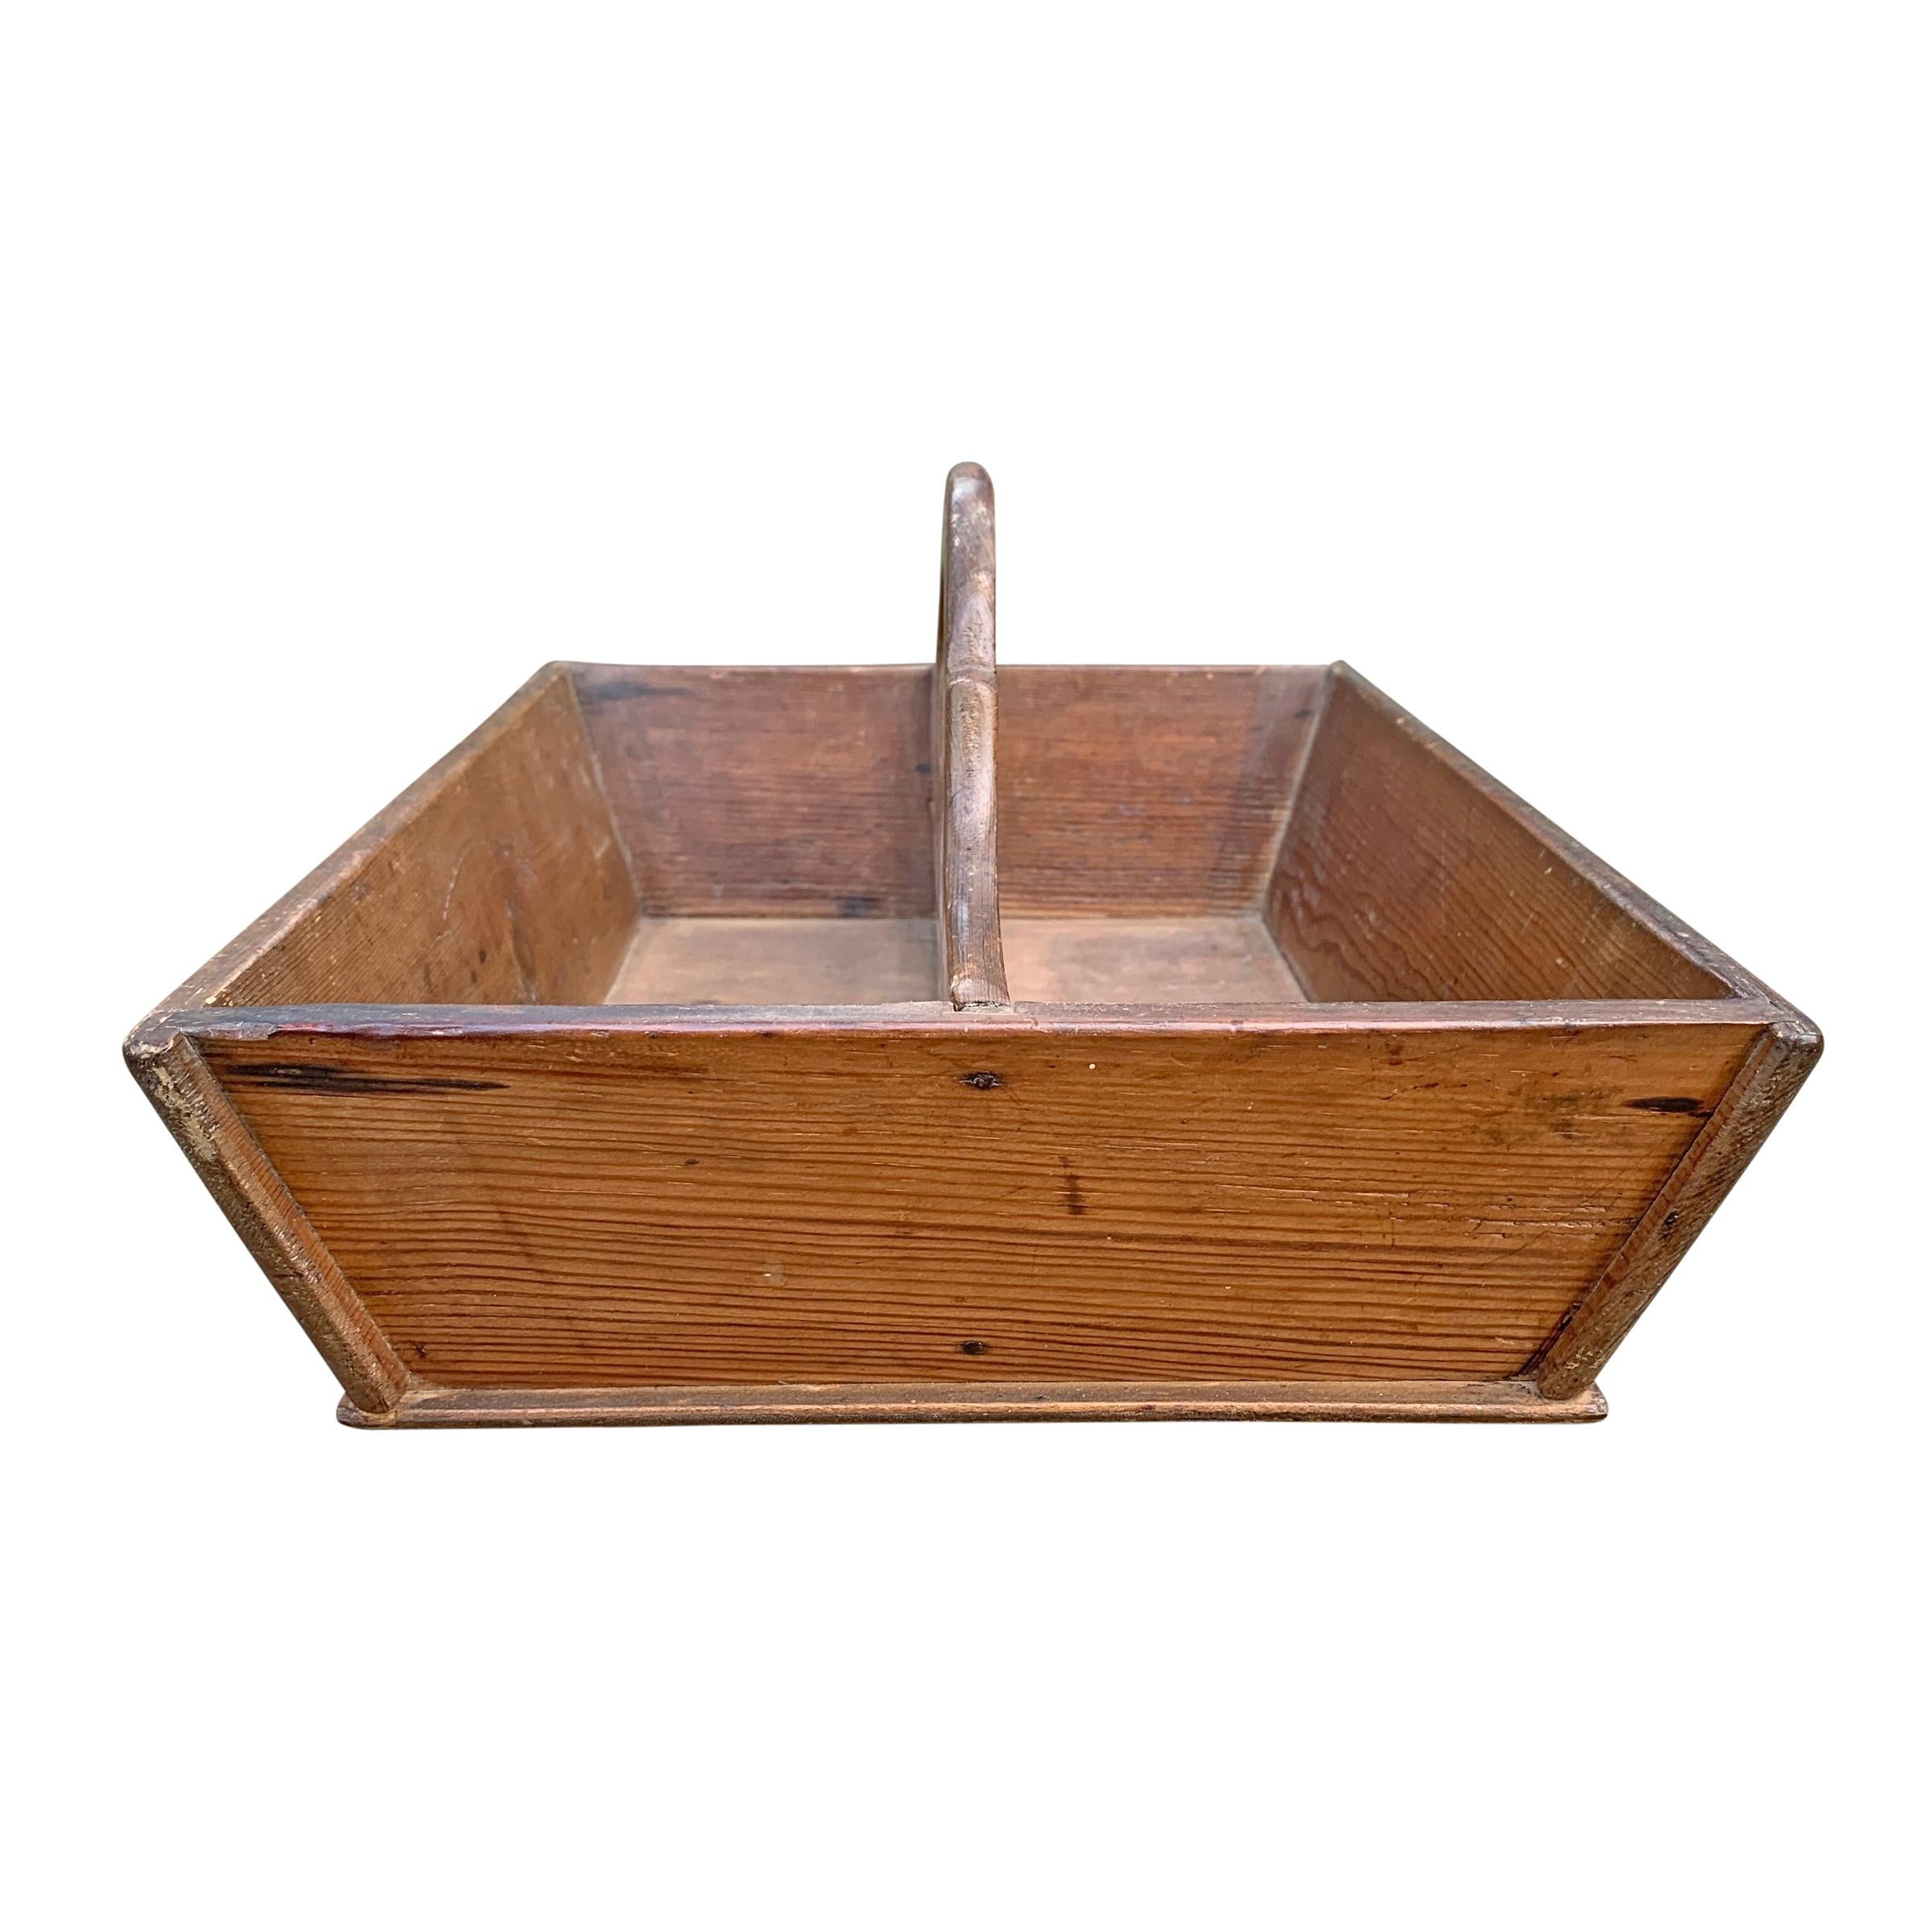 Rustic Early 19th Century Welsh Cutlery Tray For Sale